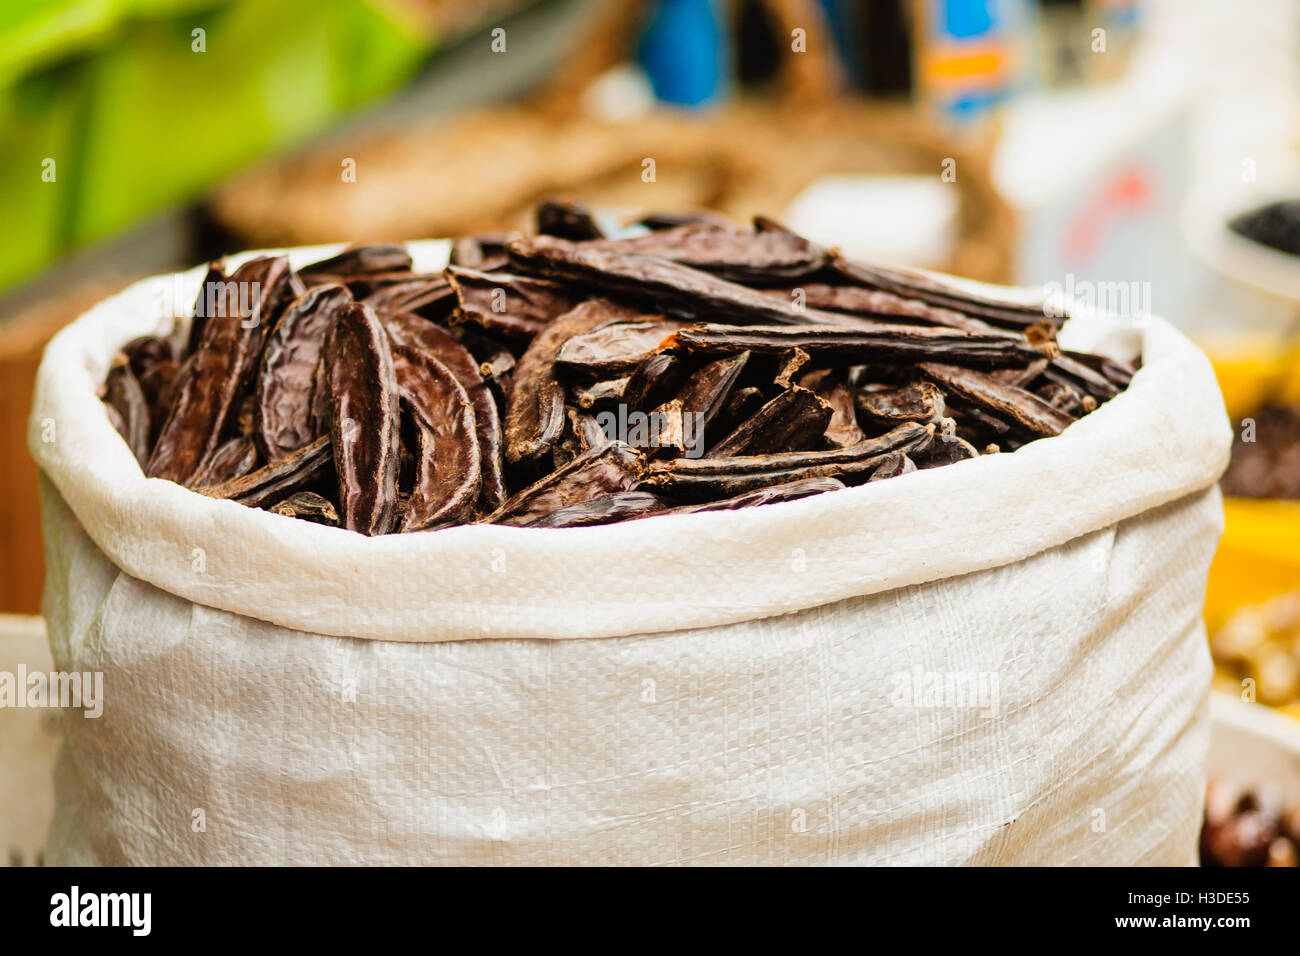 Carob pods on sale in the market Stock Photo